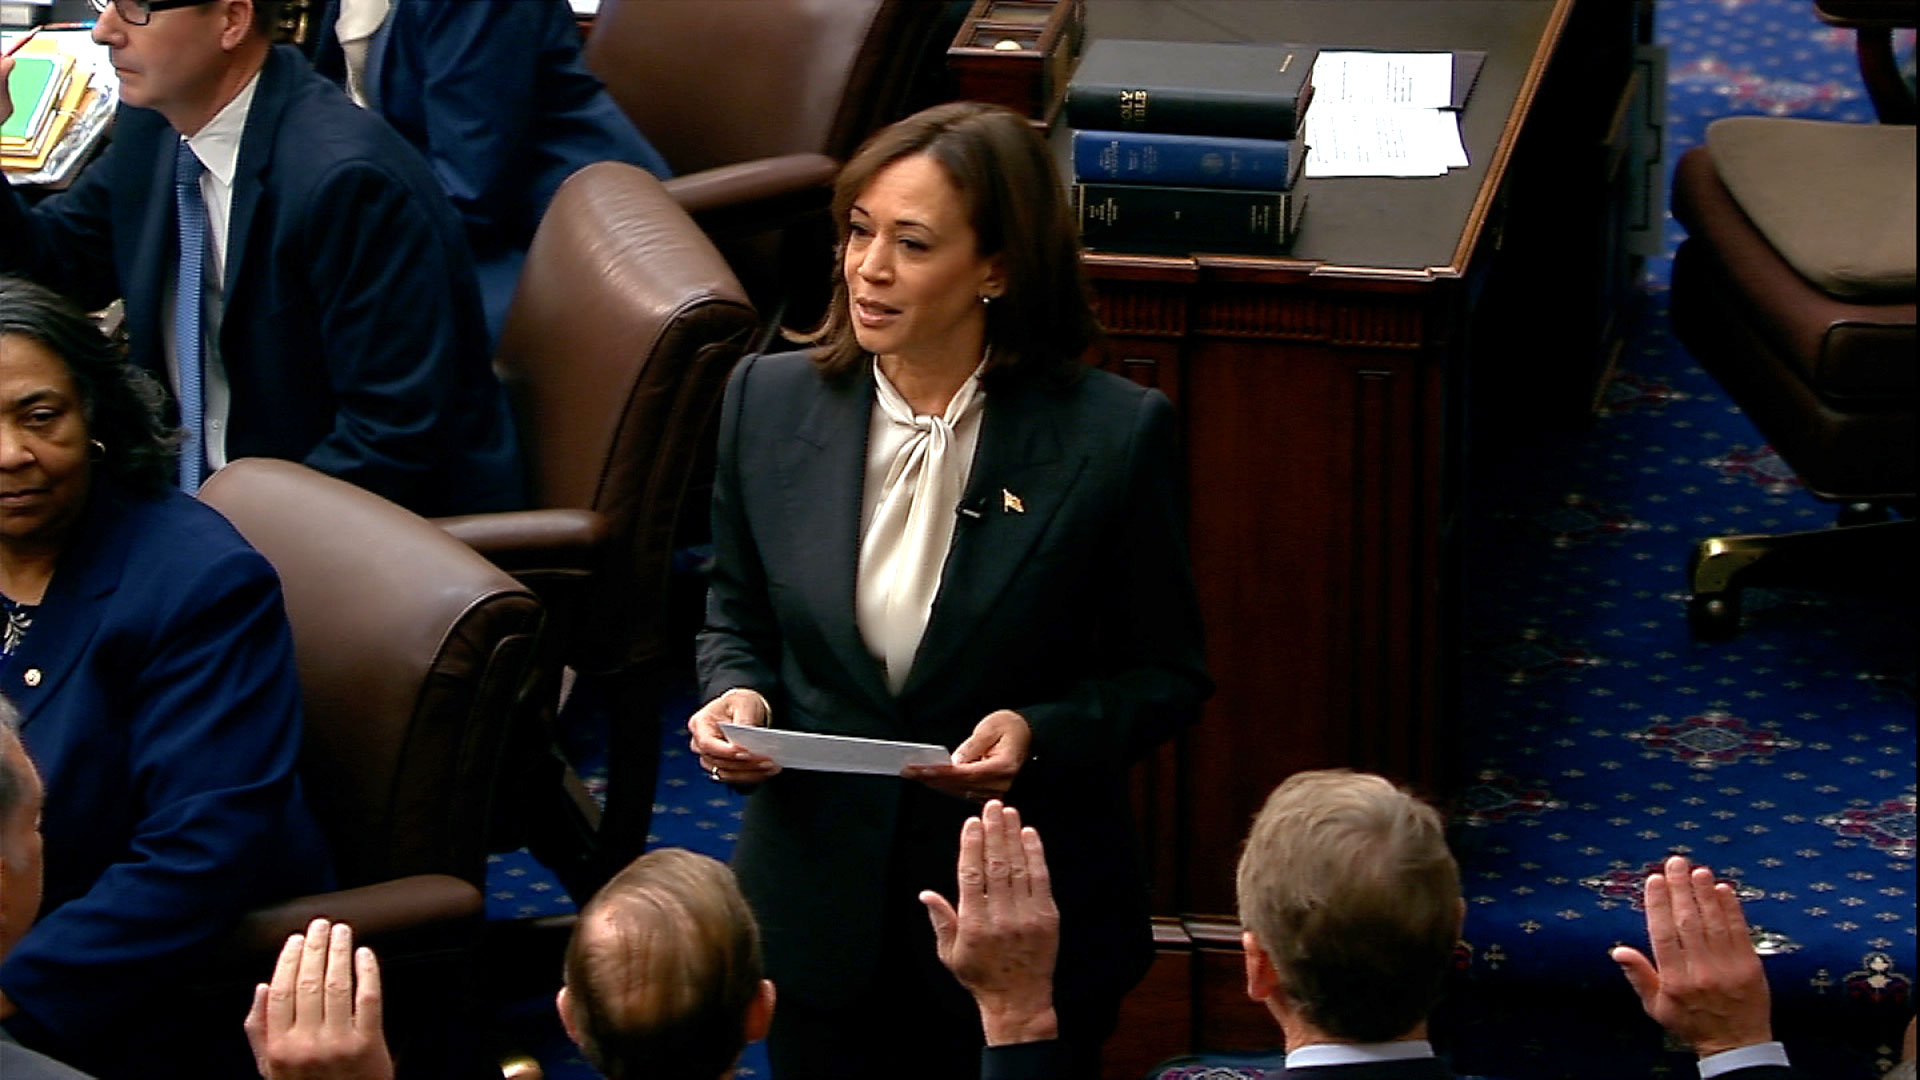 Vice President Harris becomes first woman to preside over opening day as she swears in new senators